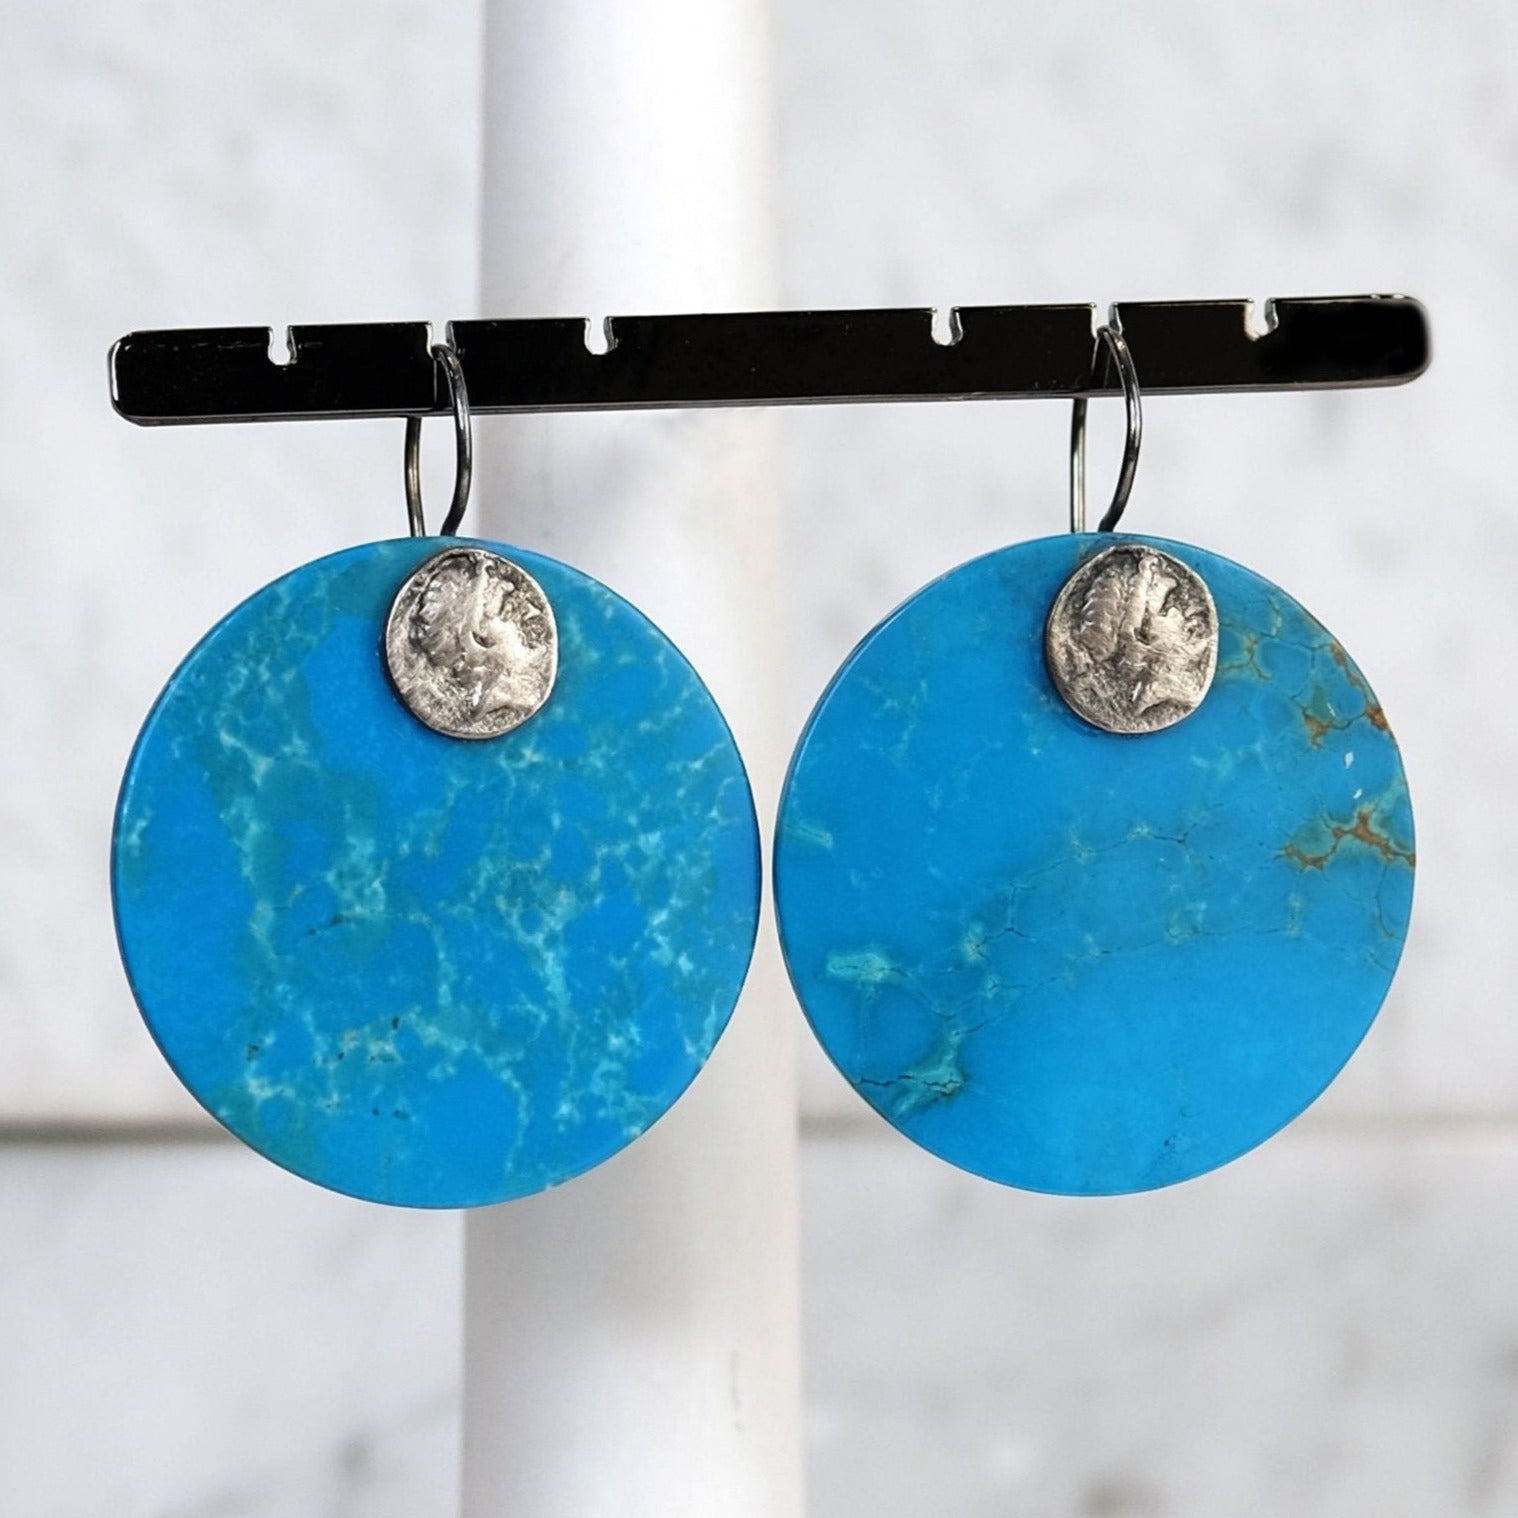 The Madstone Roman coin earrings